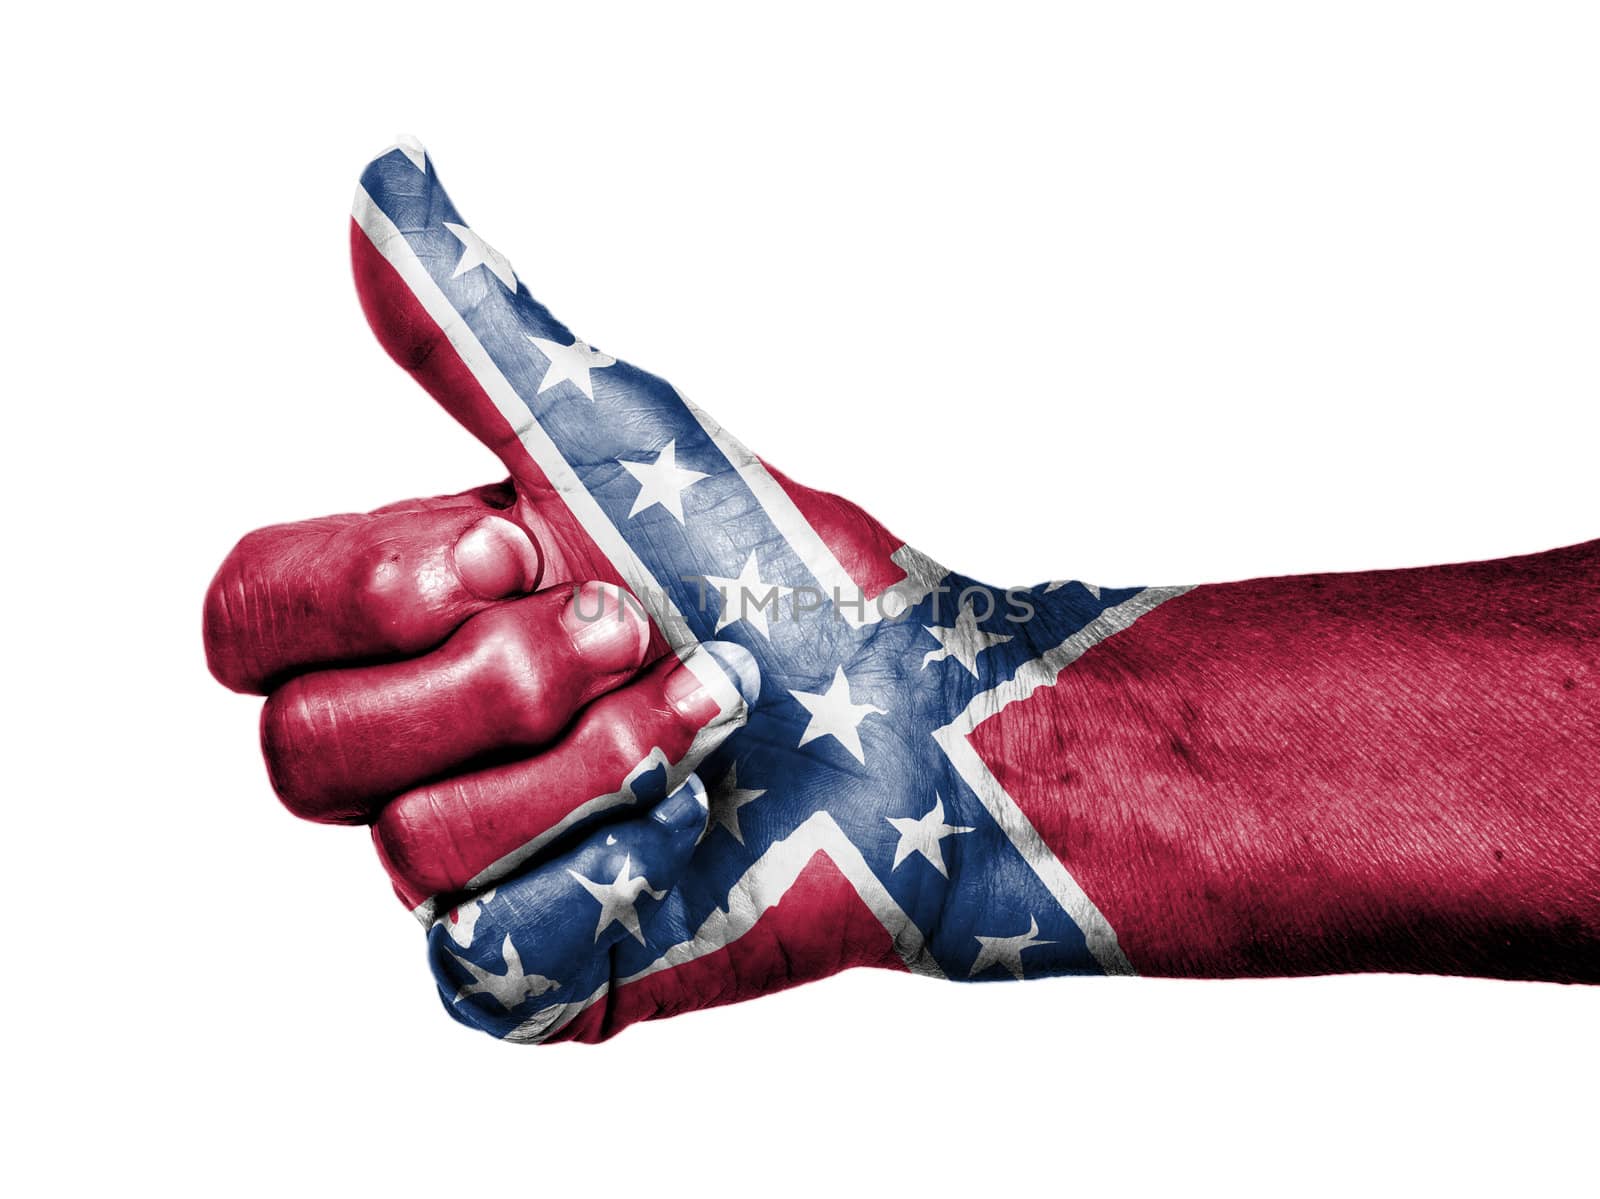 Old woman with arthritis giving the thumbs up sign, isolated on white, Confederate flag